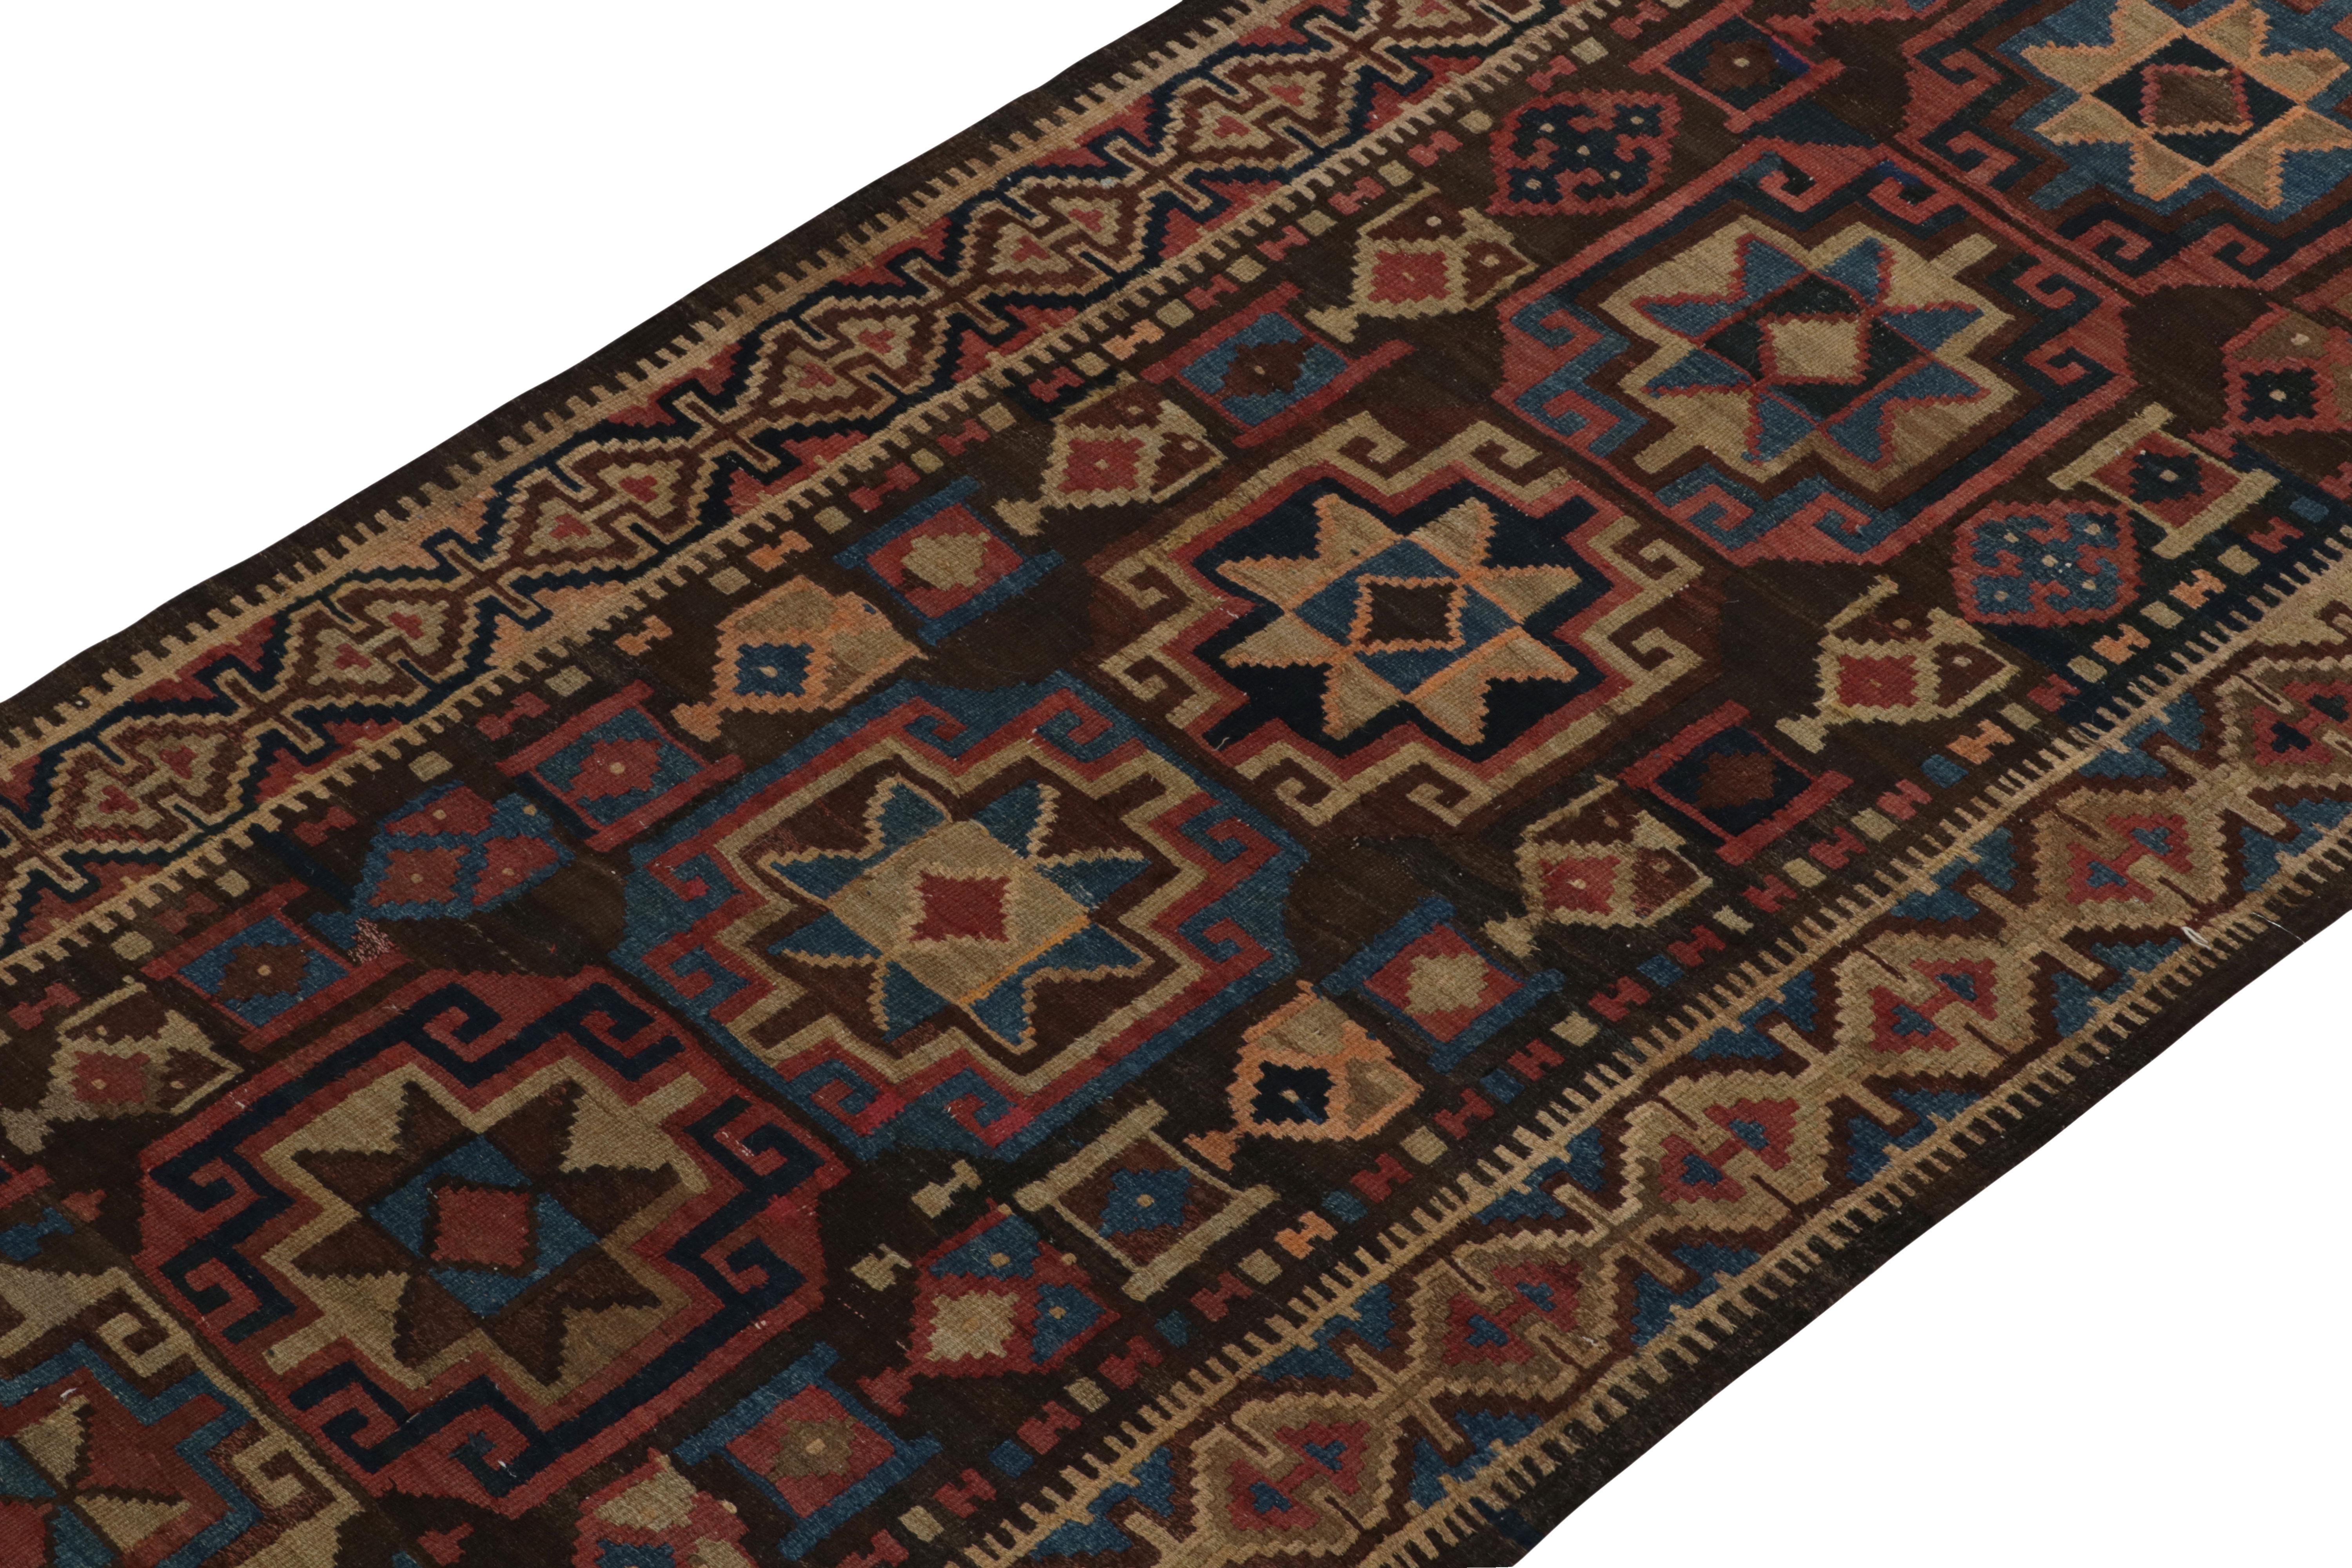 Persian Antique Kurdish Kilim Runner in Brown With Geometric Patterns, From Rug & Kilim For Sale